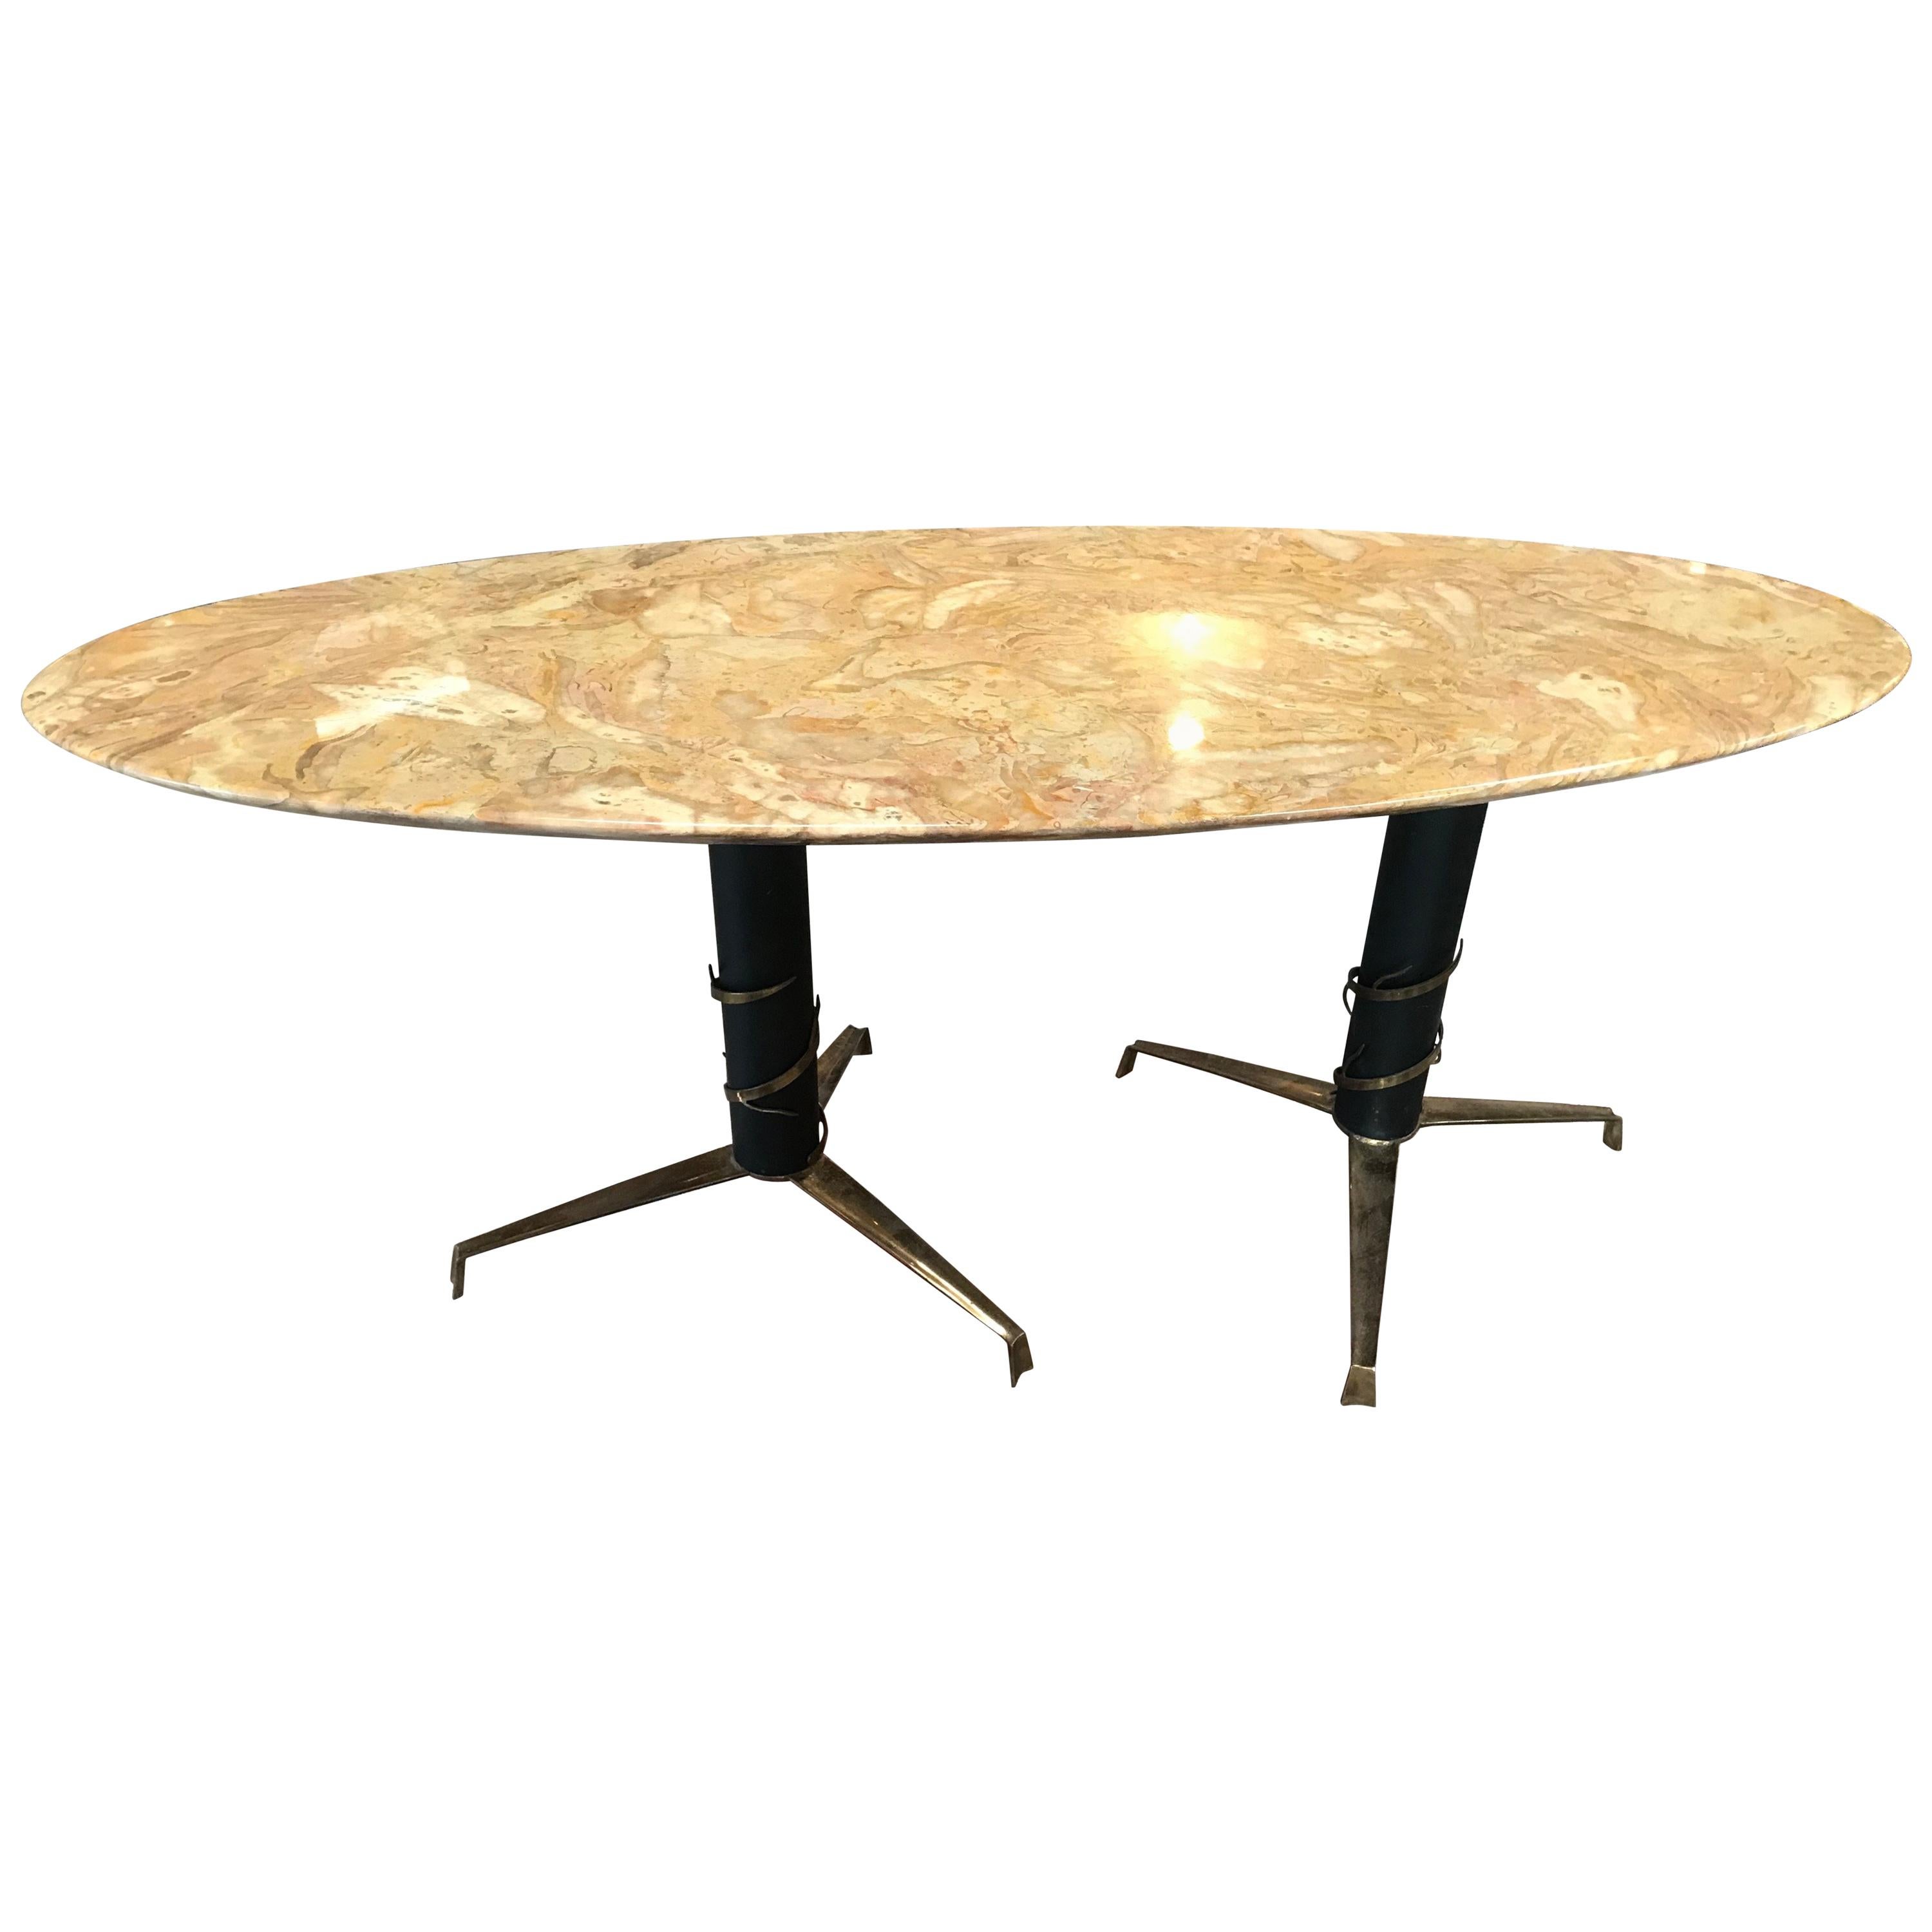 Mid-Century Modern Italian Yellow Marble and Brass Oval Coffee Table, 1950